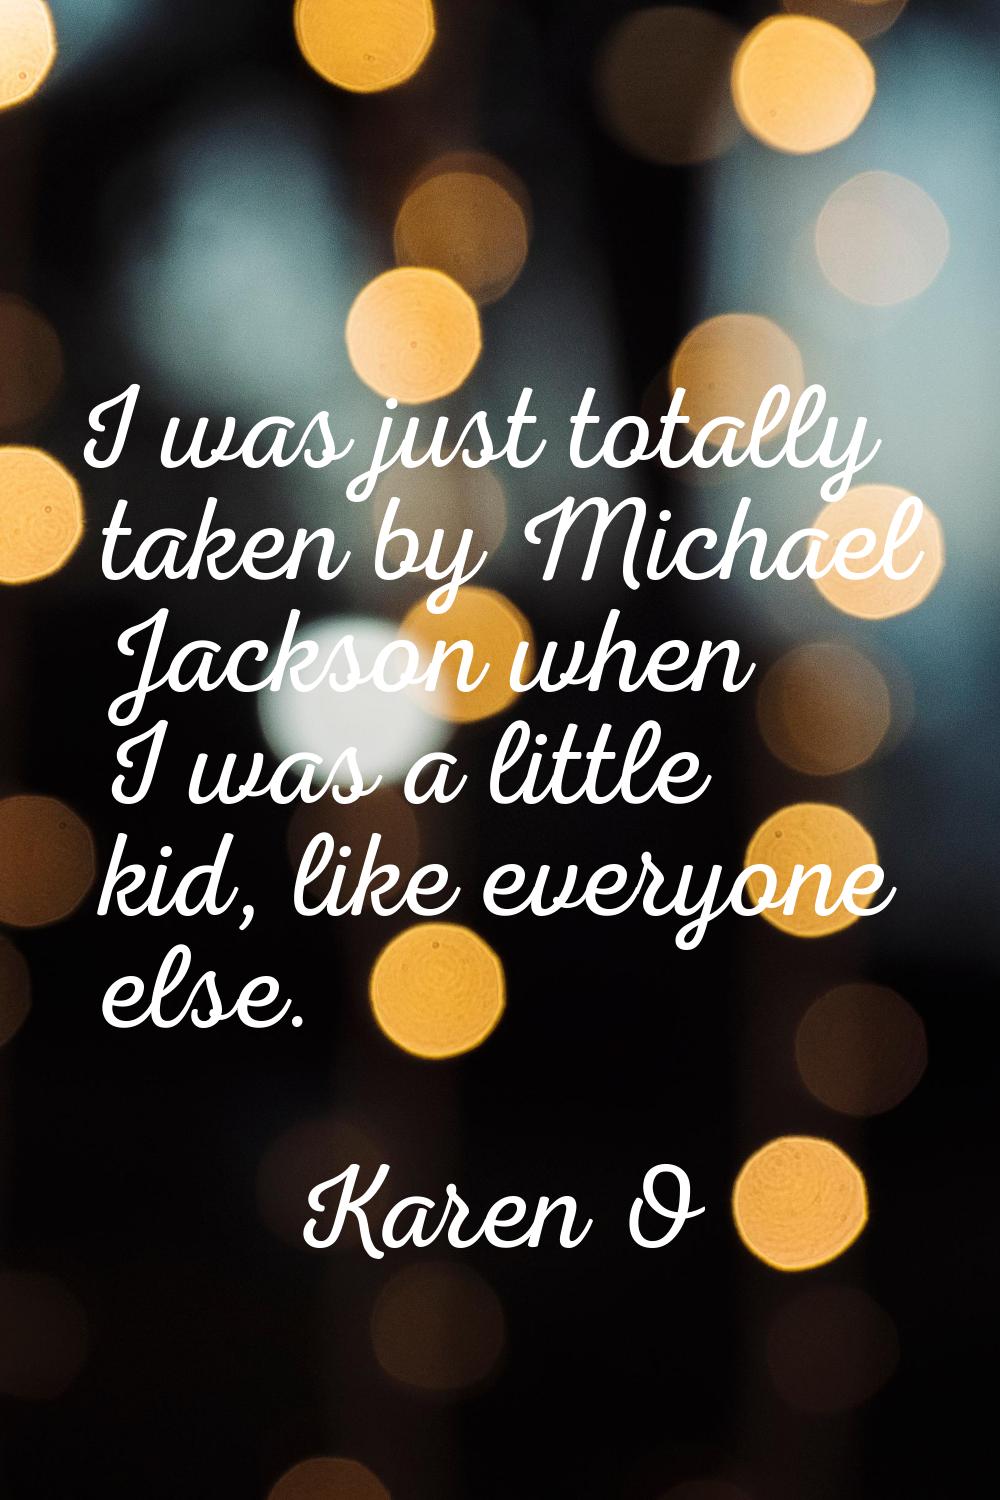 I was just totally taken by Michael Jackson when I was a little kid, like everyone else.